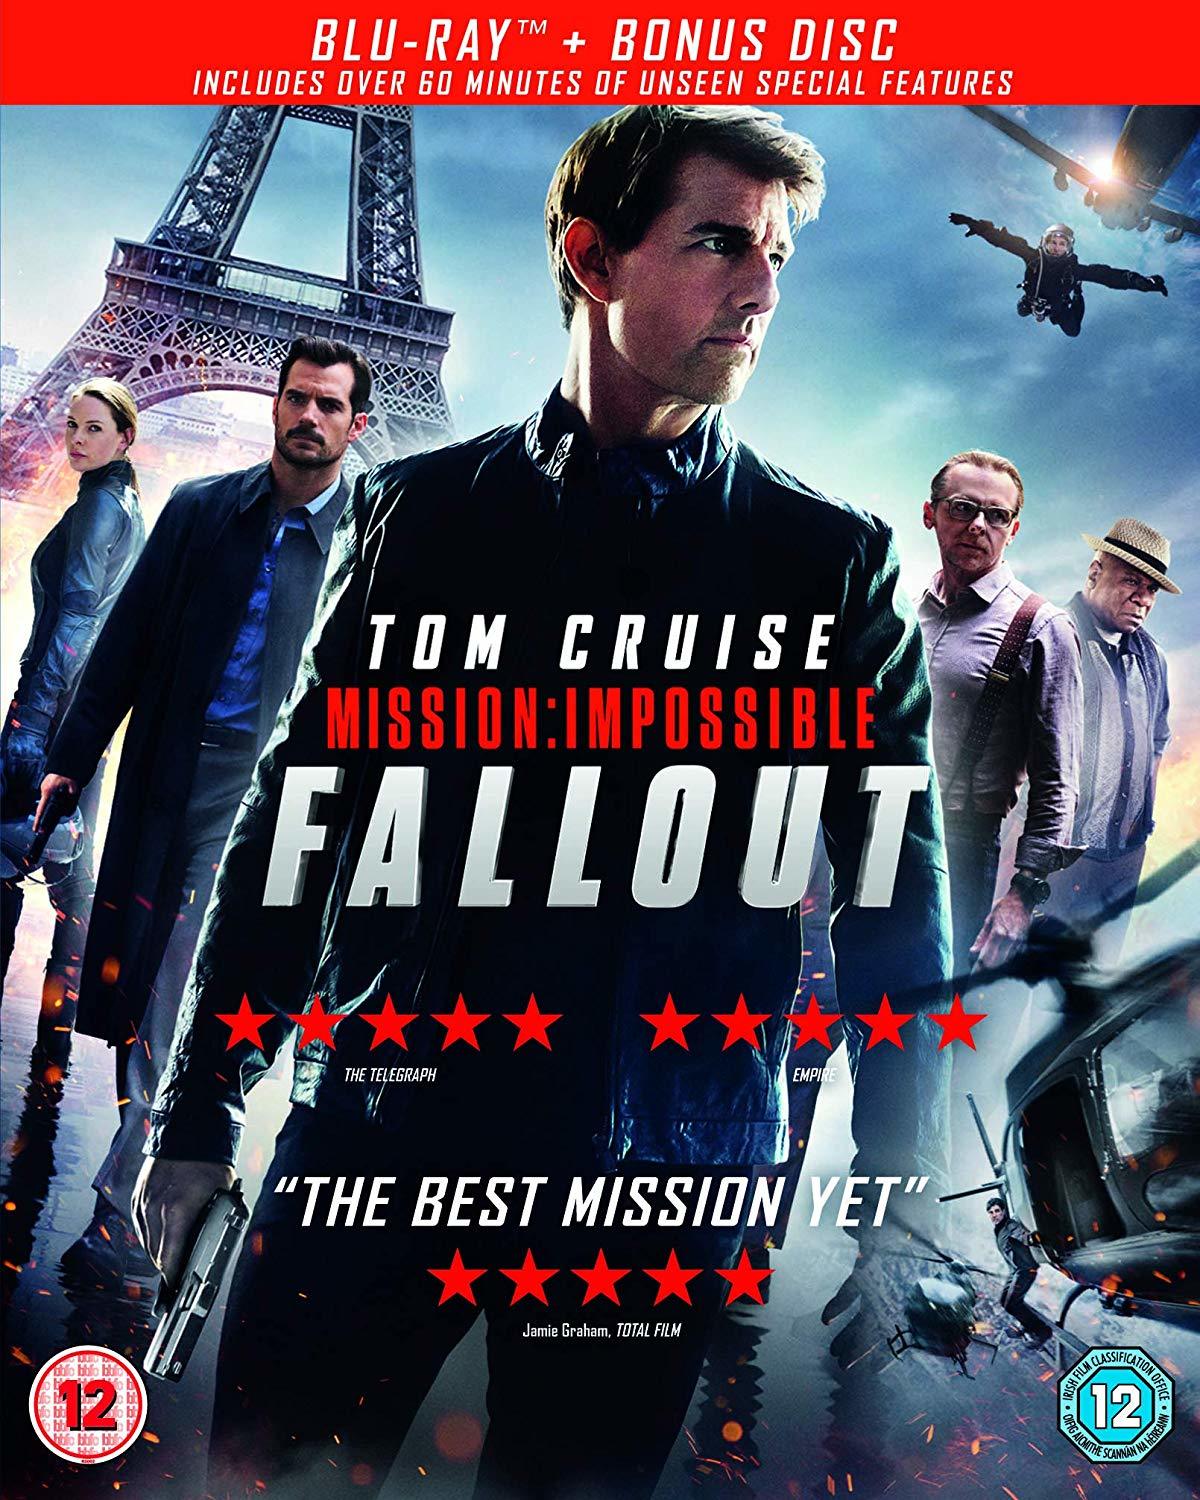 2018 - Mission: Impossible - Fallout (2018) Misión Imposible: Fallout (2018) [AC3 5.1 + SUP] [Blu Ray-Rip] 210989_front